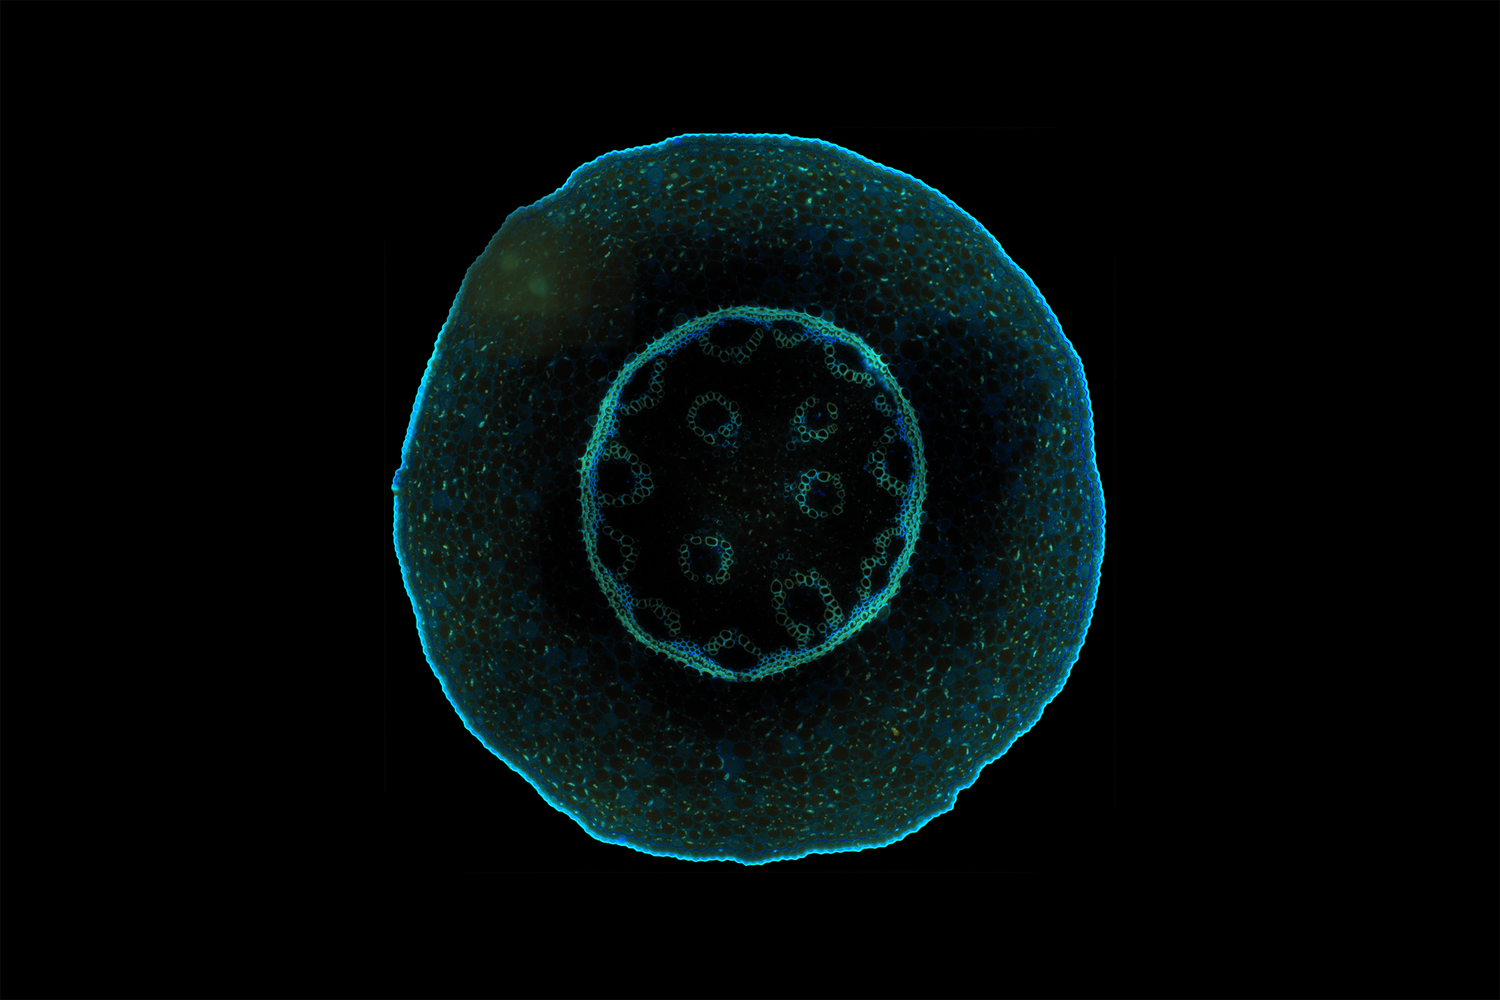 Stitched fluorescence lifetime image of Convallaria, widefield, 40x objective.